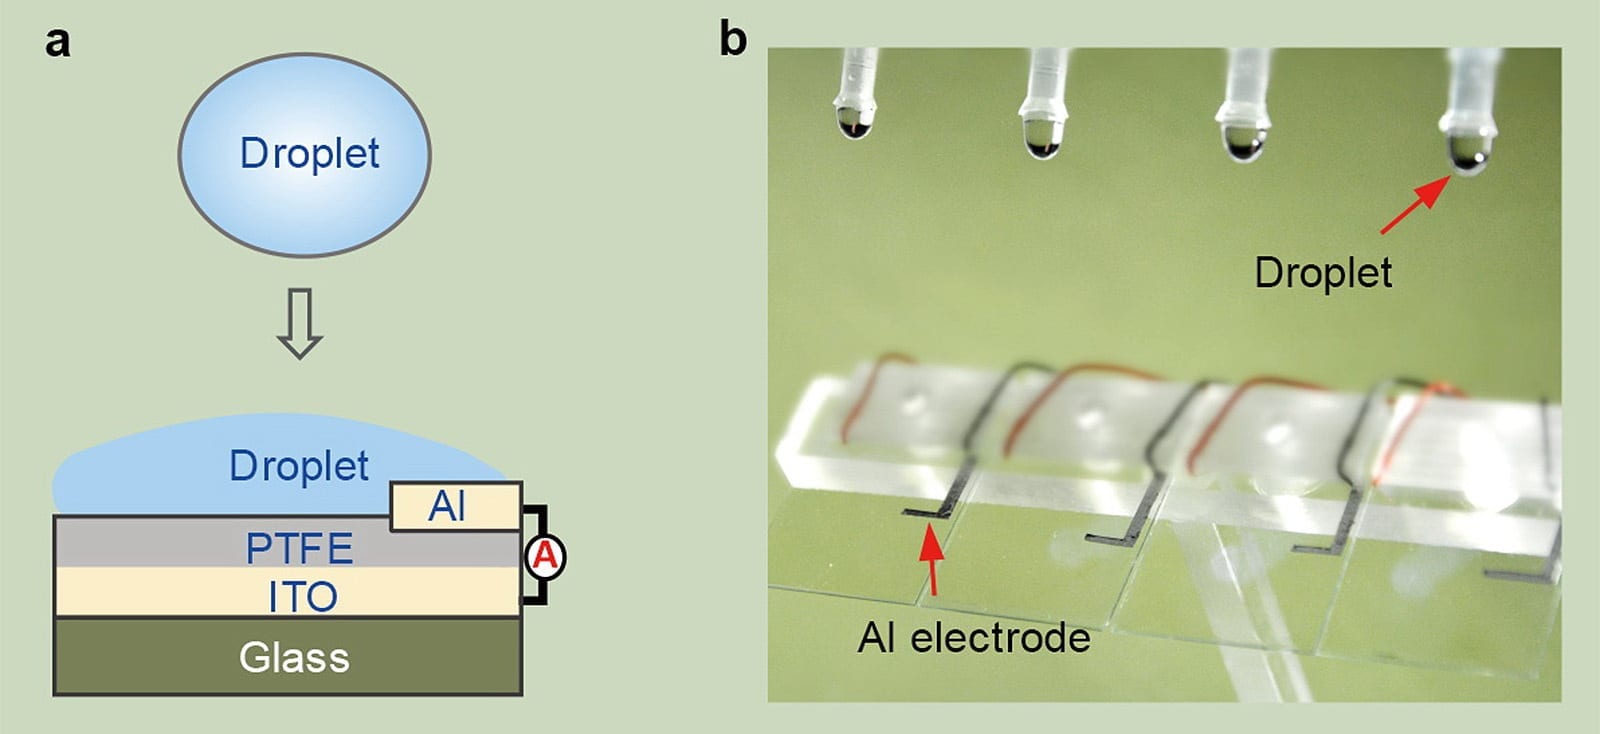 Fig a is the schematic diagram of DEG: an ITO glass slide is coated with a thin film of PTFE and an aluminium electrode is put on top of it. Drops of water act as the gate of the transistor and complete the circuit when they hit the surface of the glass. Fig b is the optical image showing four parallel DEG devices fabricated on the glass substrate.